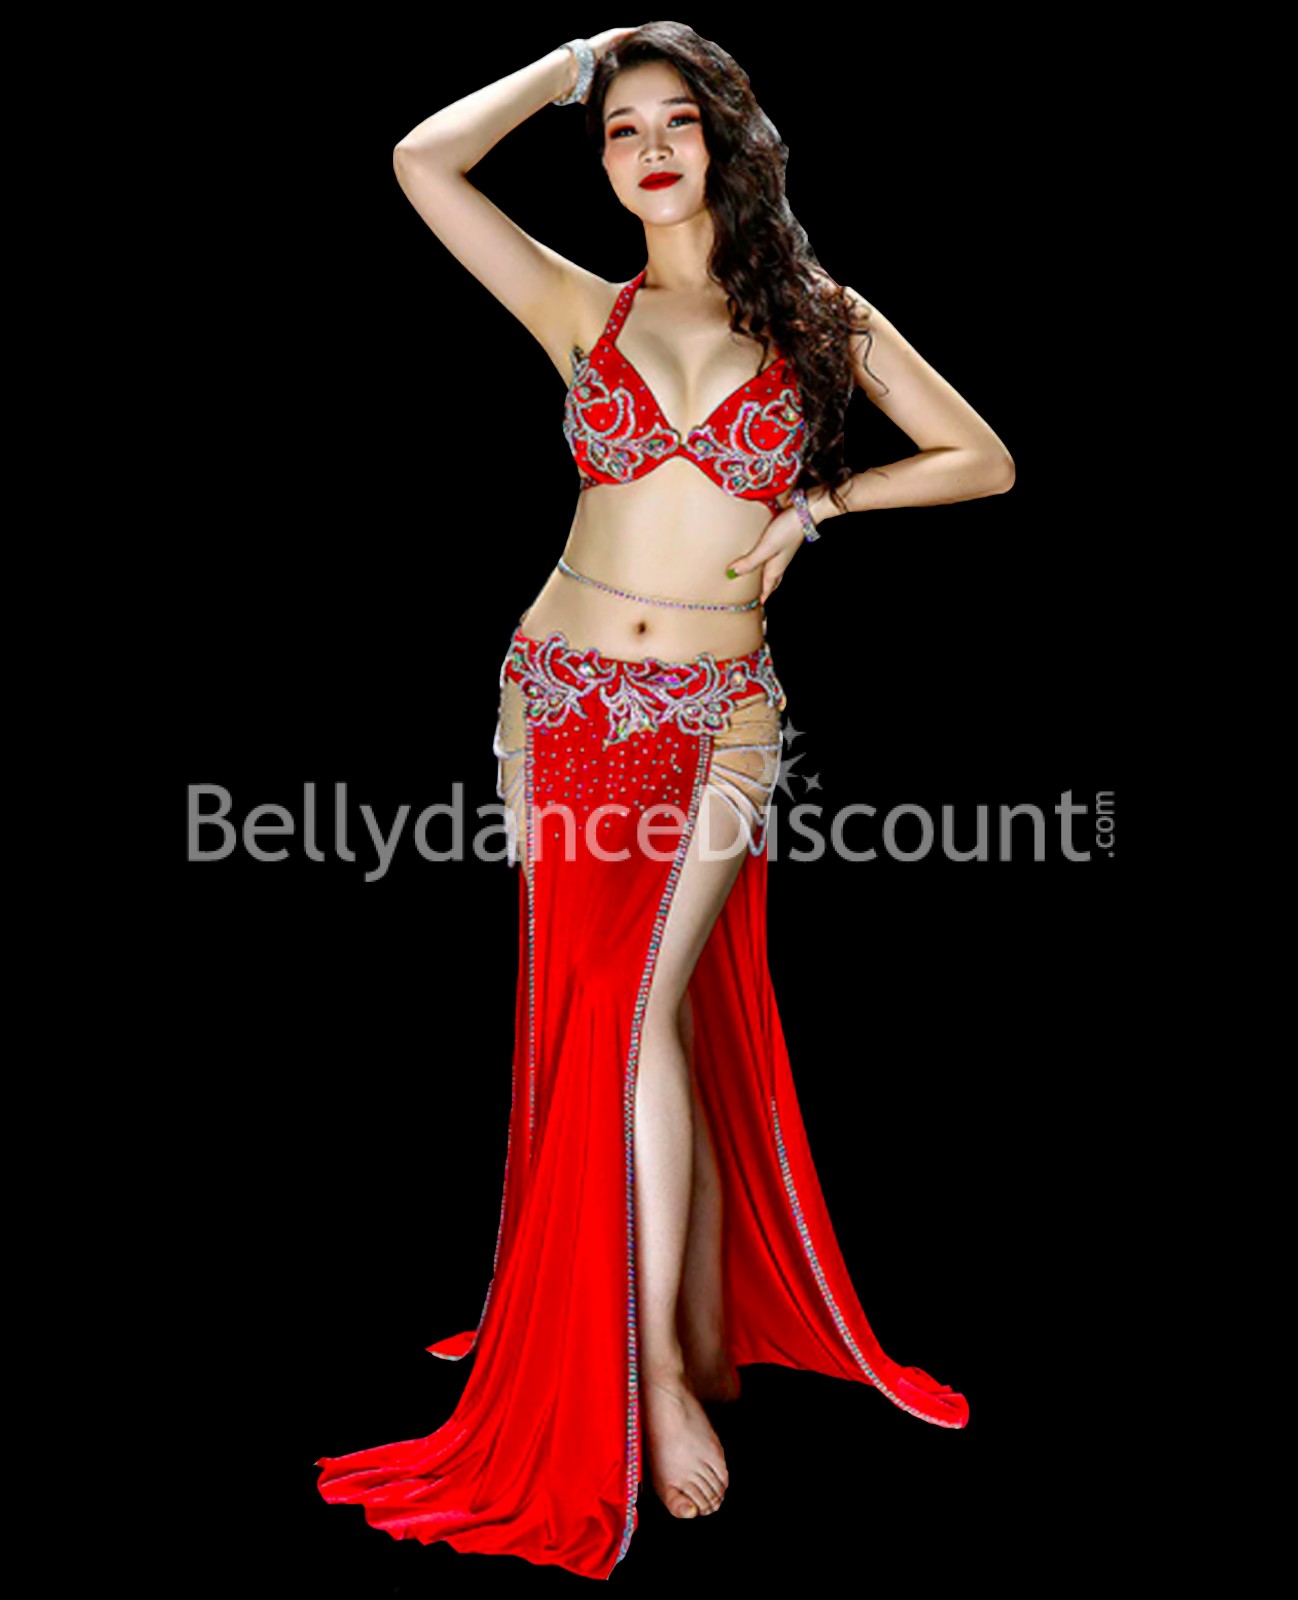 Vintage red Bellydance outfit